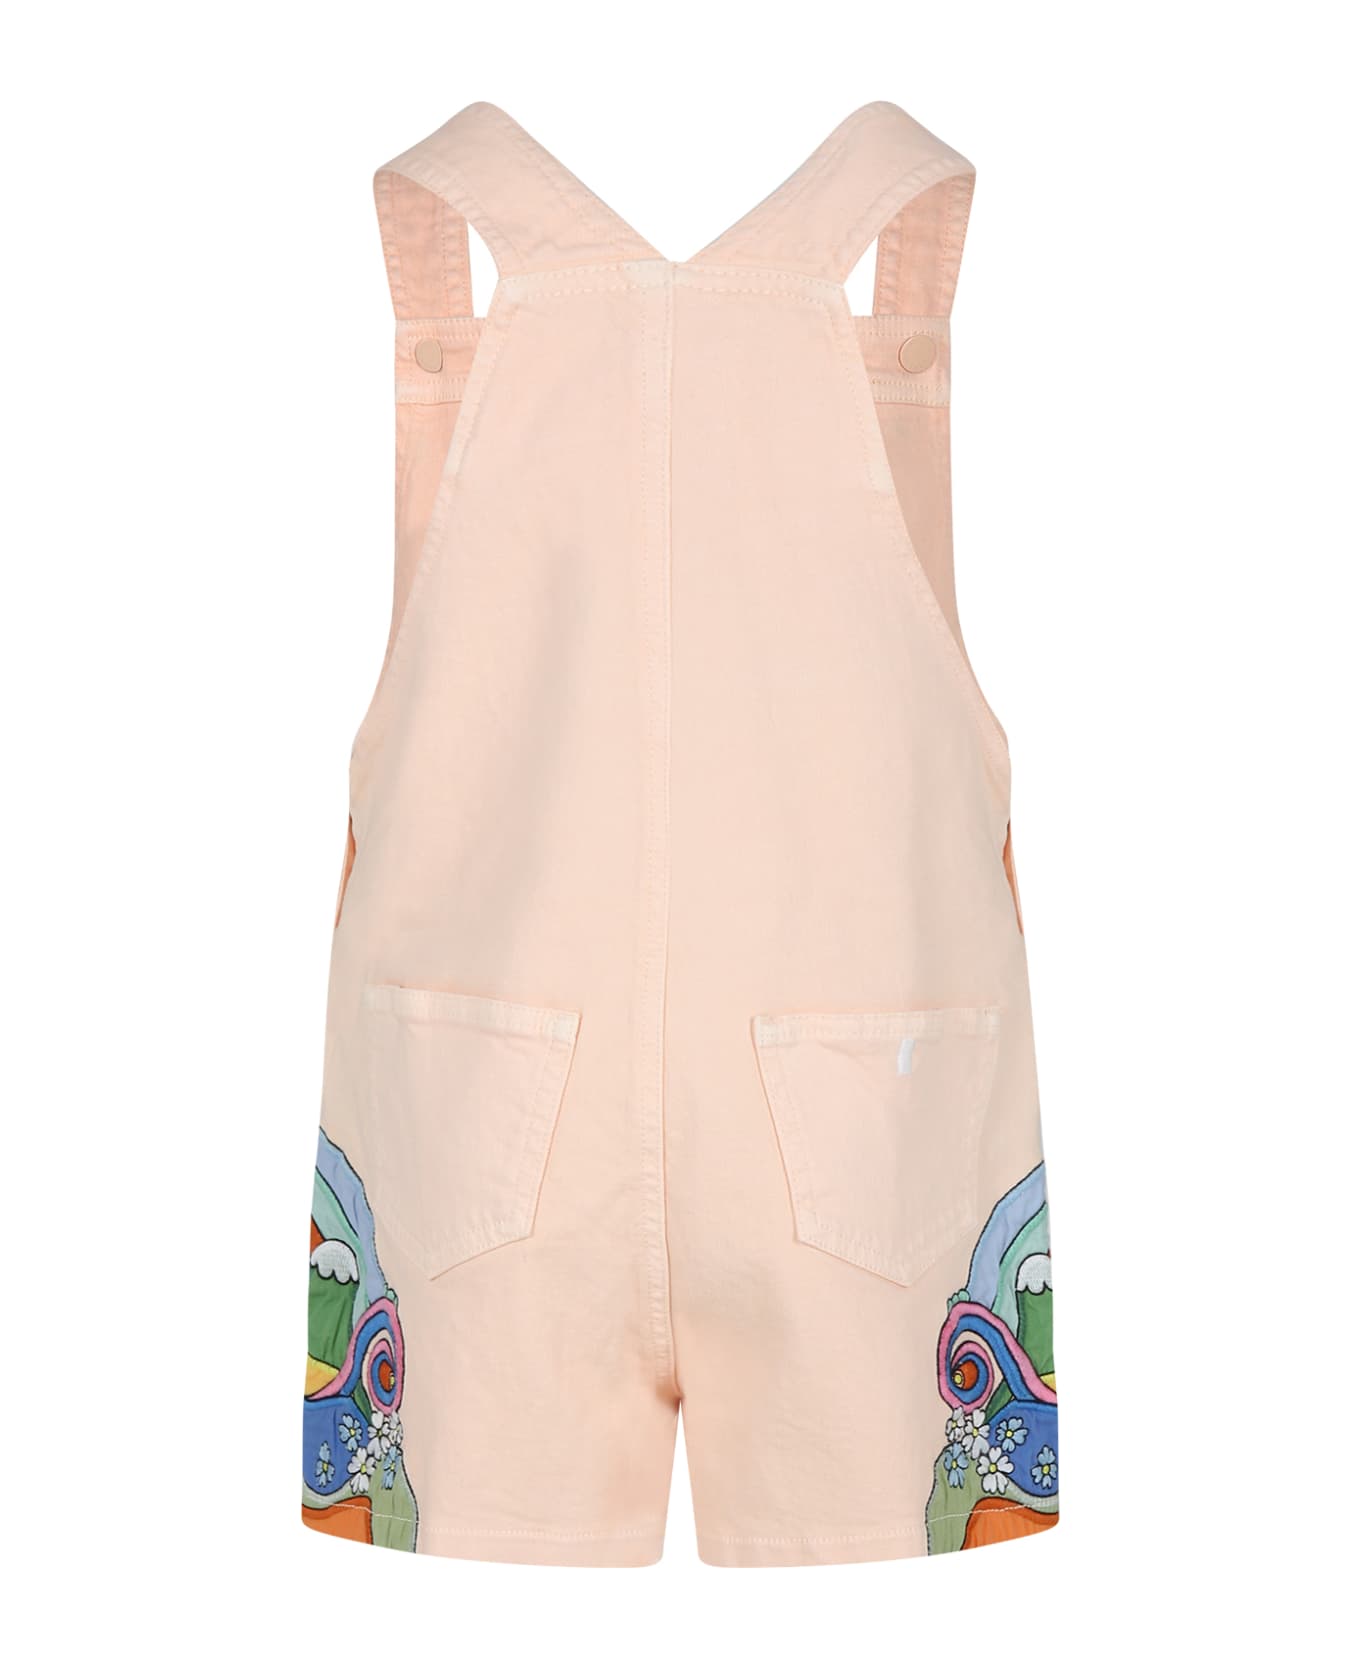 Stella McCartney Kids Pink Dungarees For Girl With Floral Embroidery - Pink